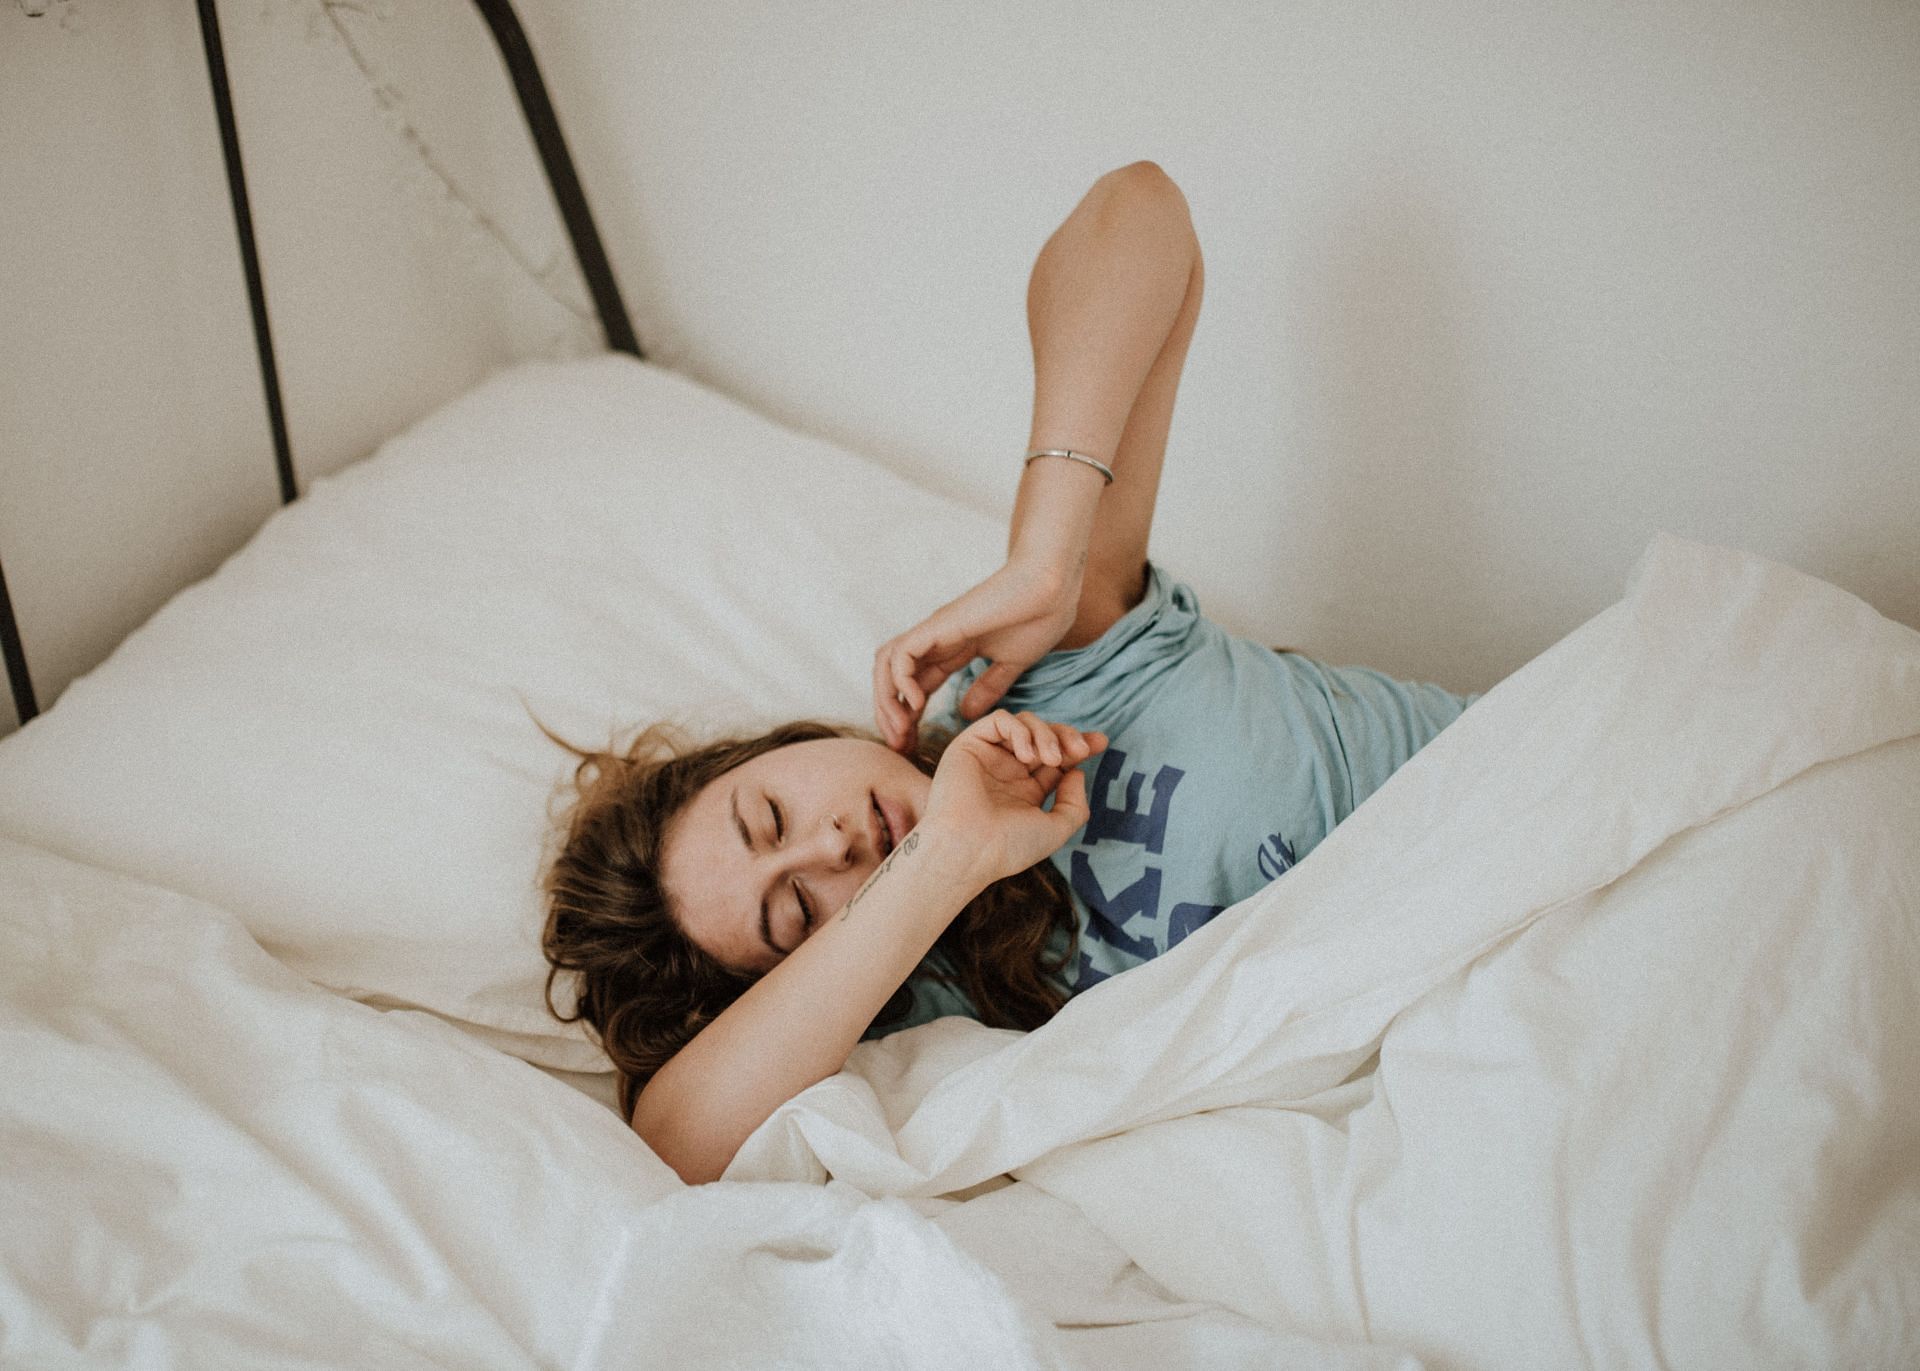 Getting enough sleep is a great way to prevent excessive hunger pangs. (Image via unsplash/Kinga Cichewicz)